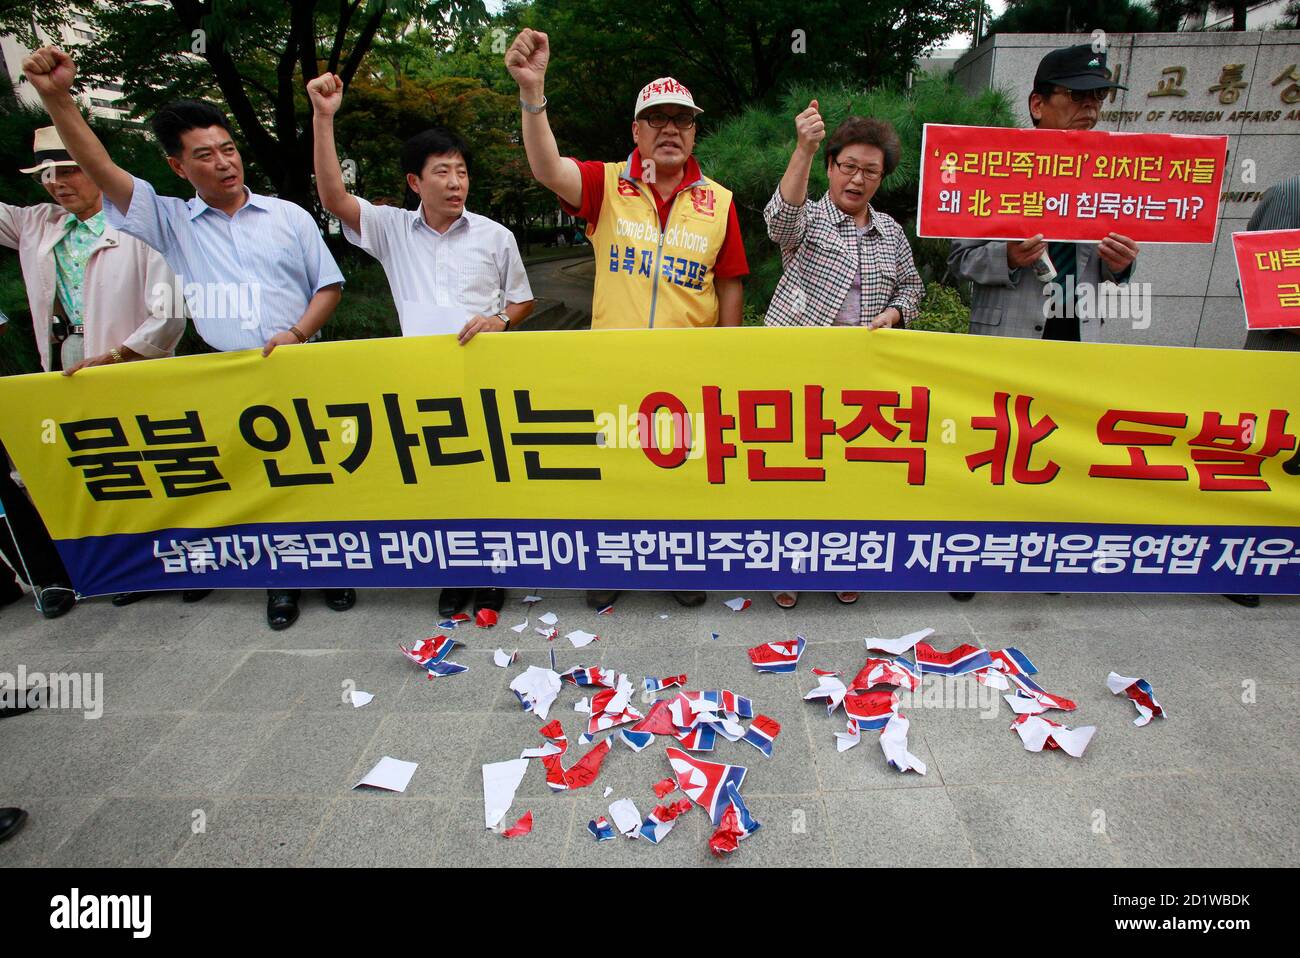 Anti-North Korea protesters shout slogans after tearing North Korean flags during a rally denouncing North Korea's sudden release of water from their dams on the Imjin River, in front of the Integrated Government Complex in Seoul September 8, 2009. South Korea demanded an apology from North Korea on Tuesday for its sudden release of water into the river flowing across their border, causing a pre-dawn flash flood on Sunday that swept away six people, casting a pall over recently warming ties between the rivals. The banner reads: 'Respond strongly against the extreme barbarous provocation by Nor Stock Photo